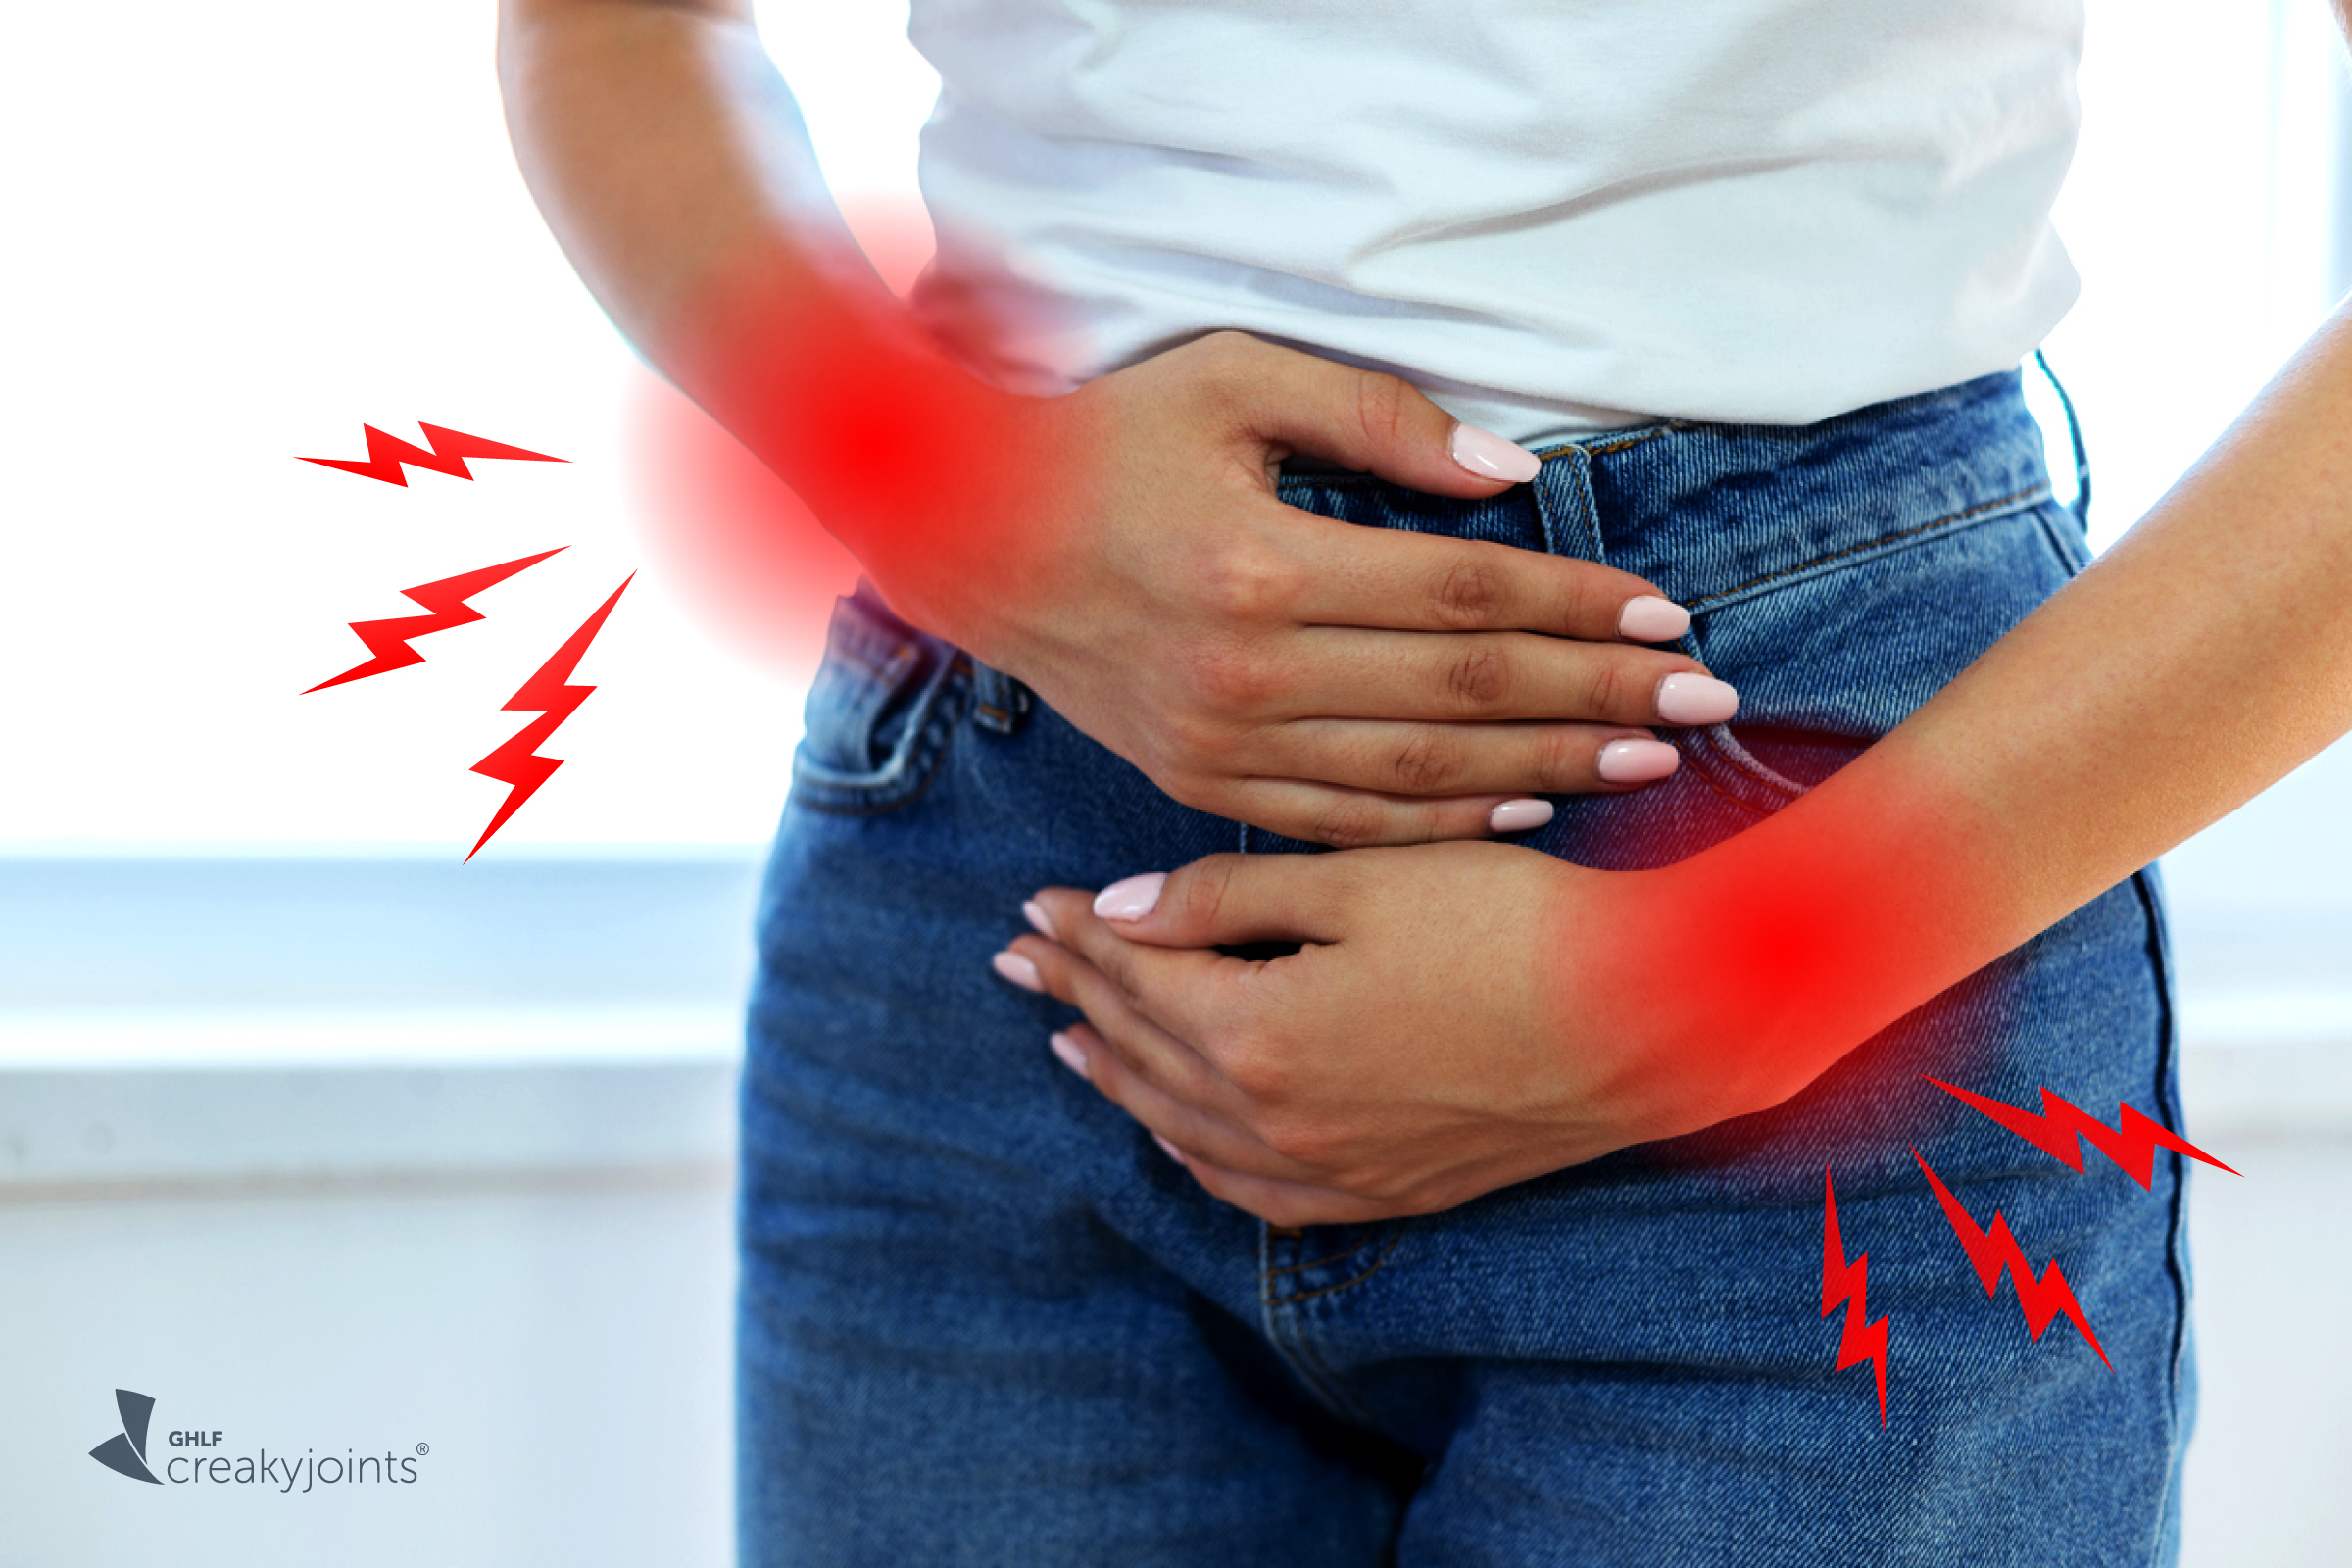 Your Period, Menstrual Cycle, and Arthritis Flares: What's the